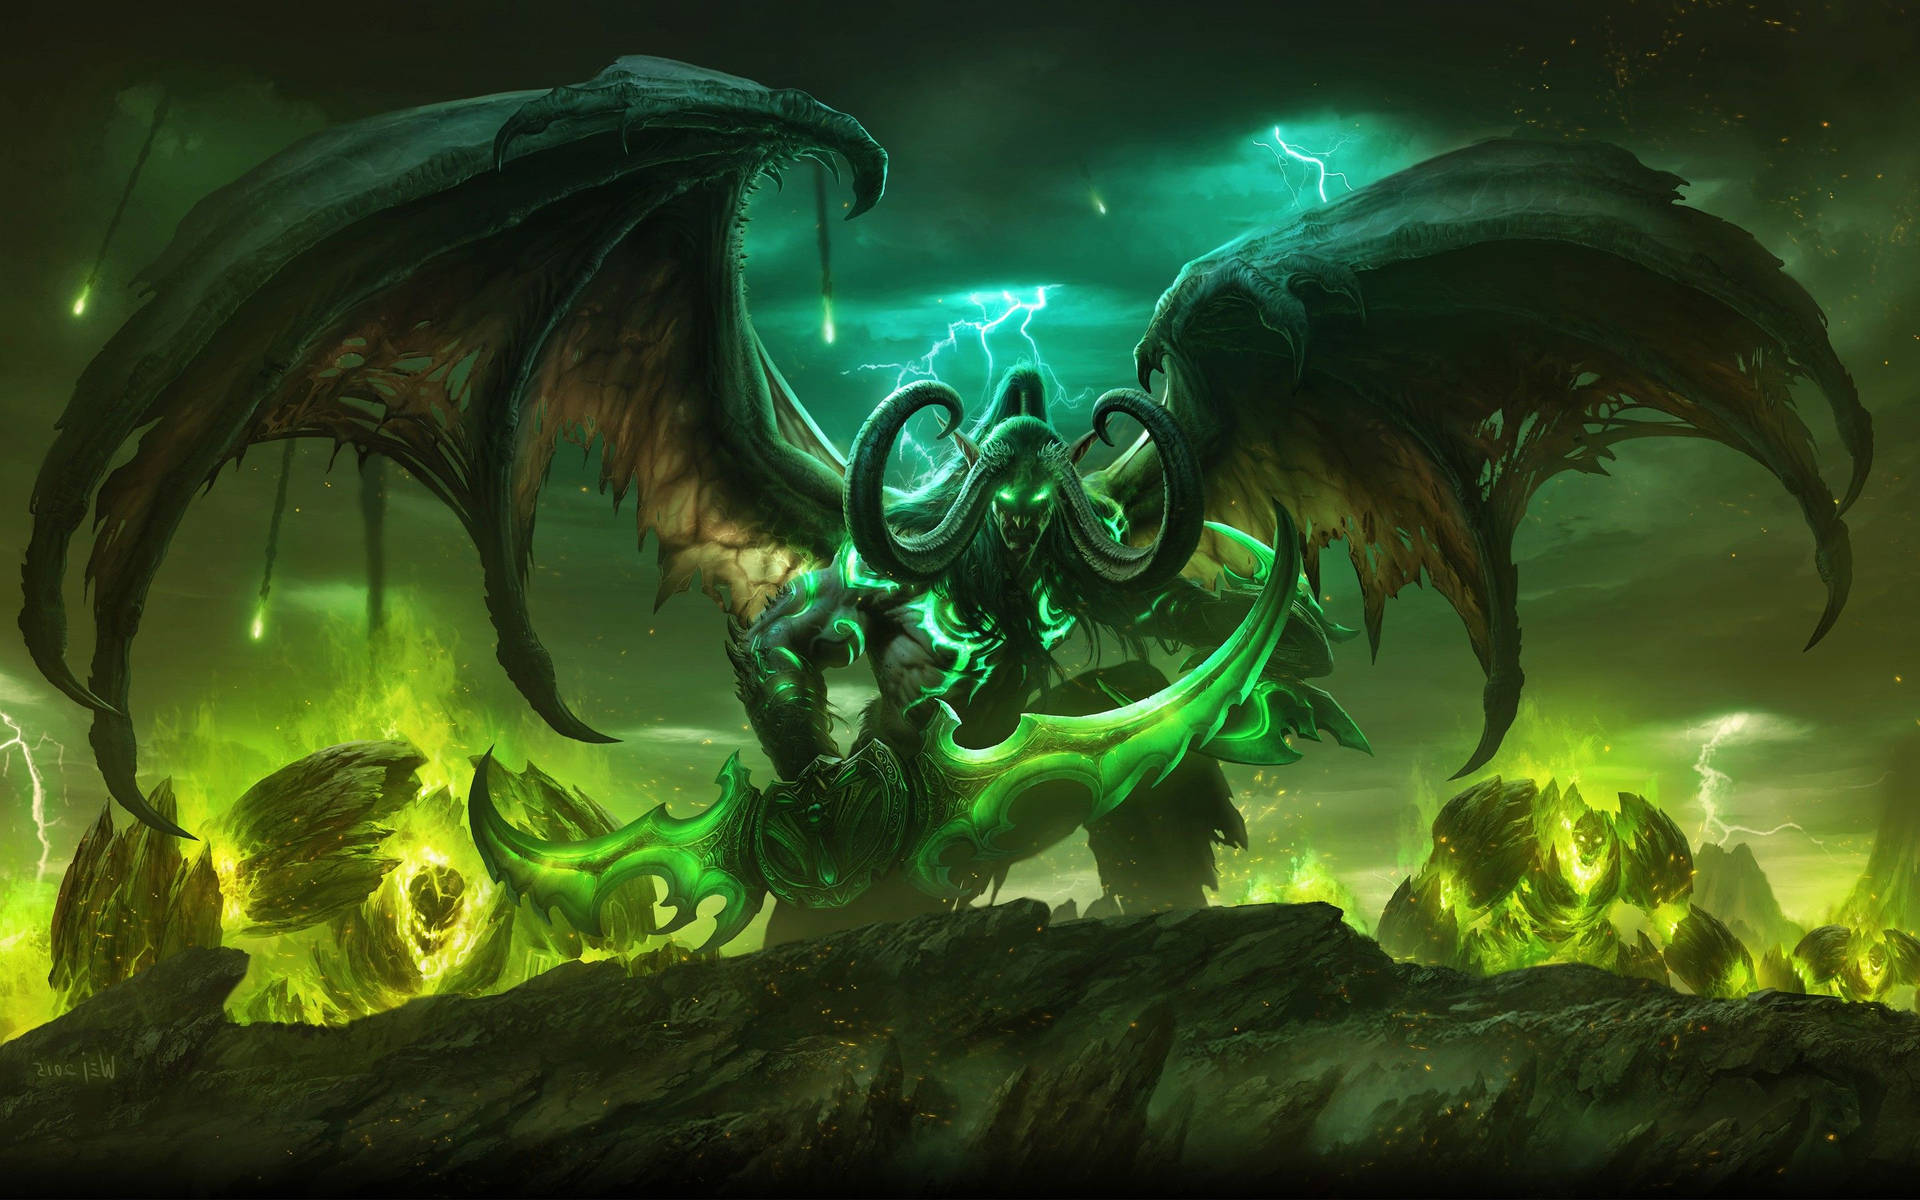 The legendary Illidan rises in power with World of Warcraft: Legion Wallpaper